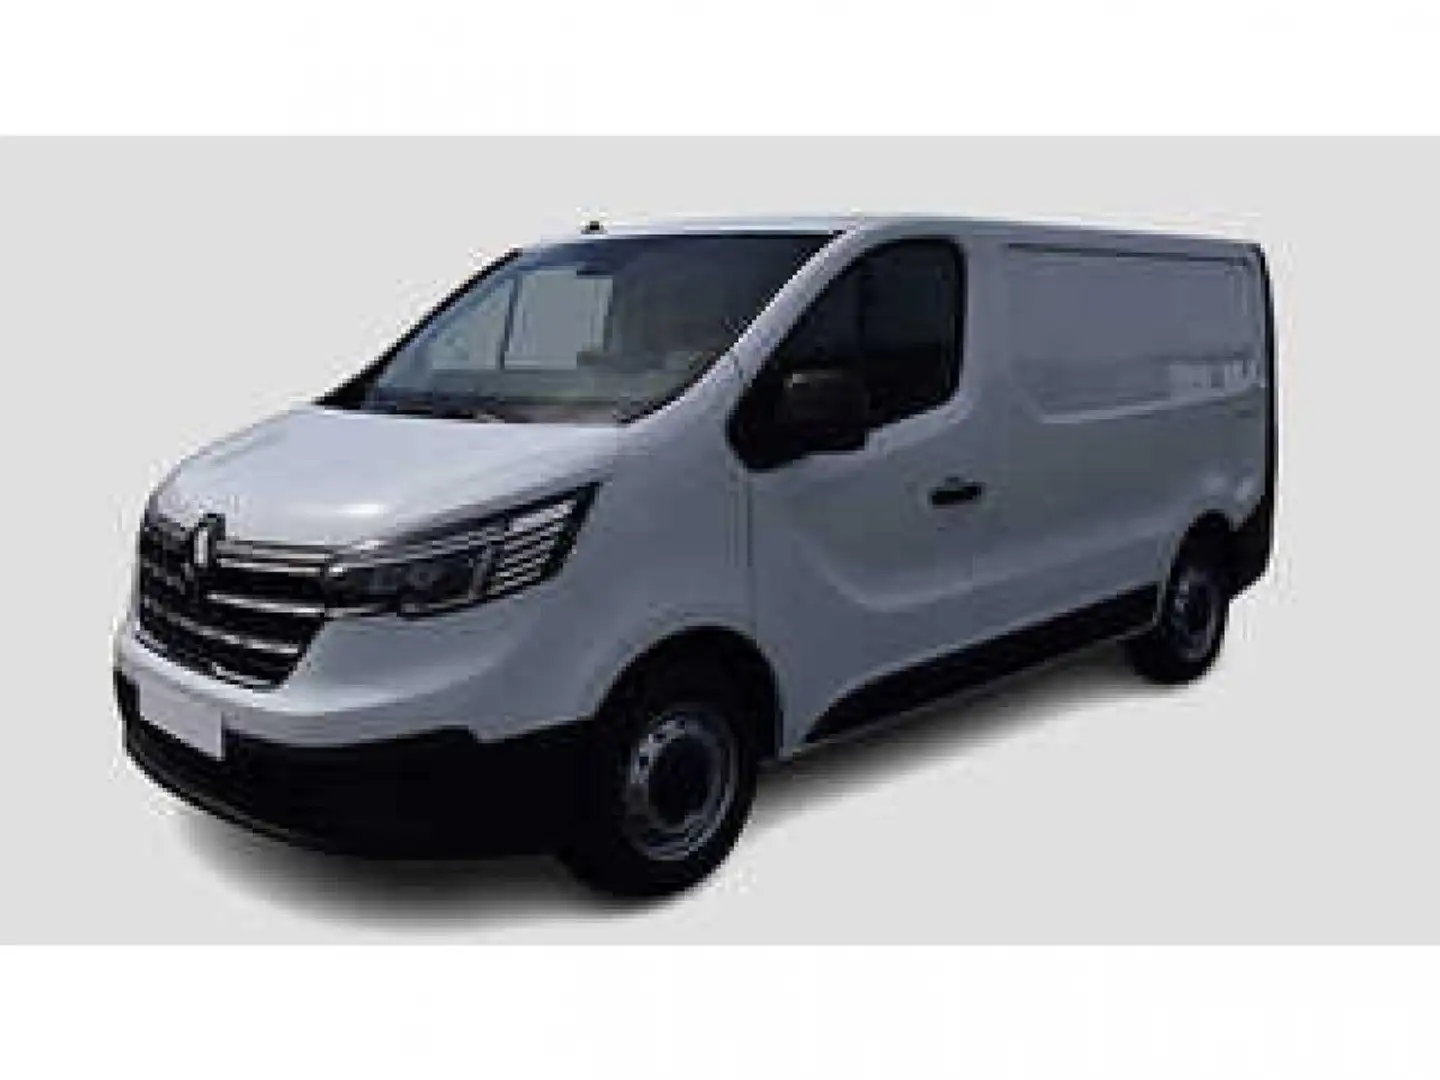 Renault Trafic L1H1 1200 Kg 2.0 Blue dCi - 130 III FOURGON Fourgo Wit - 2